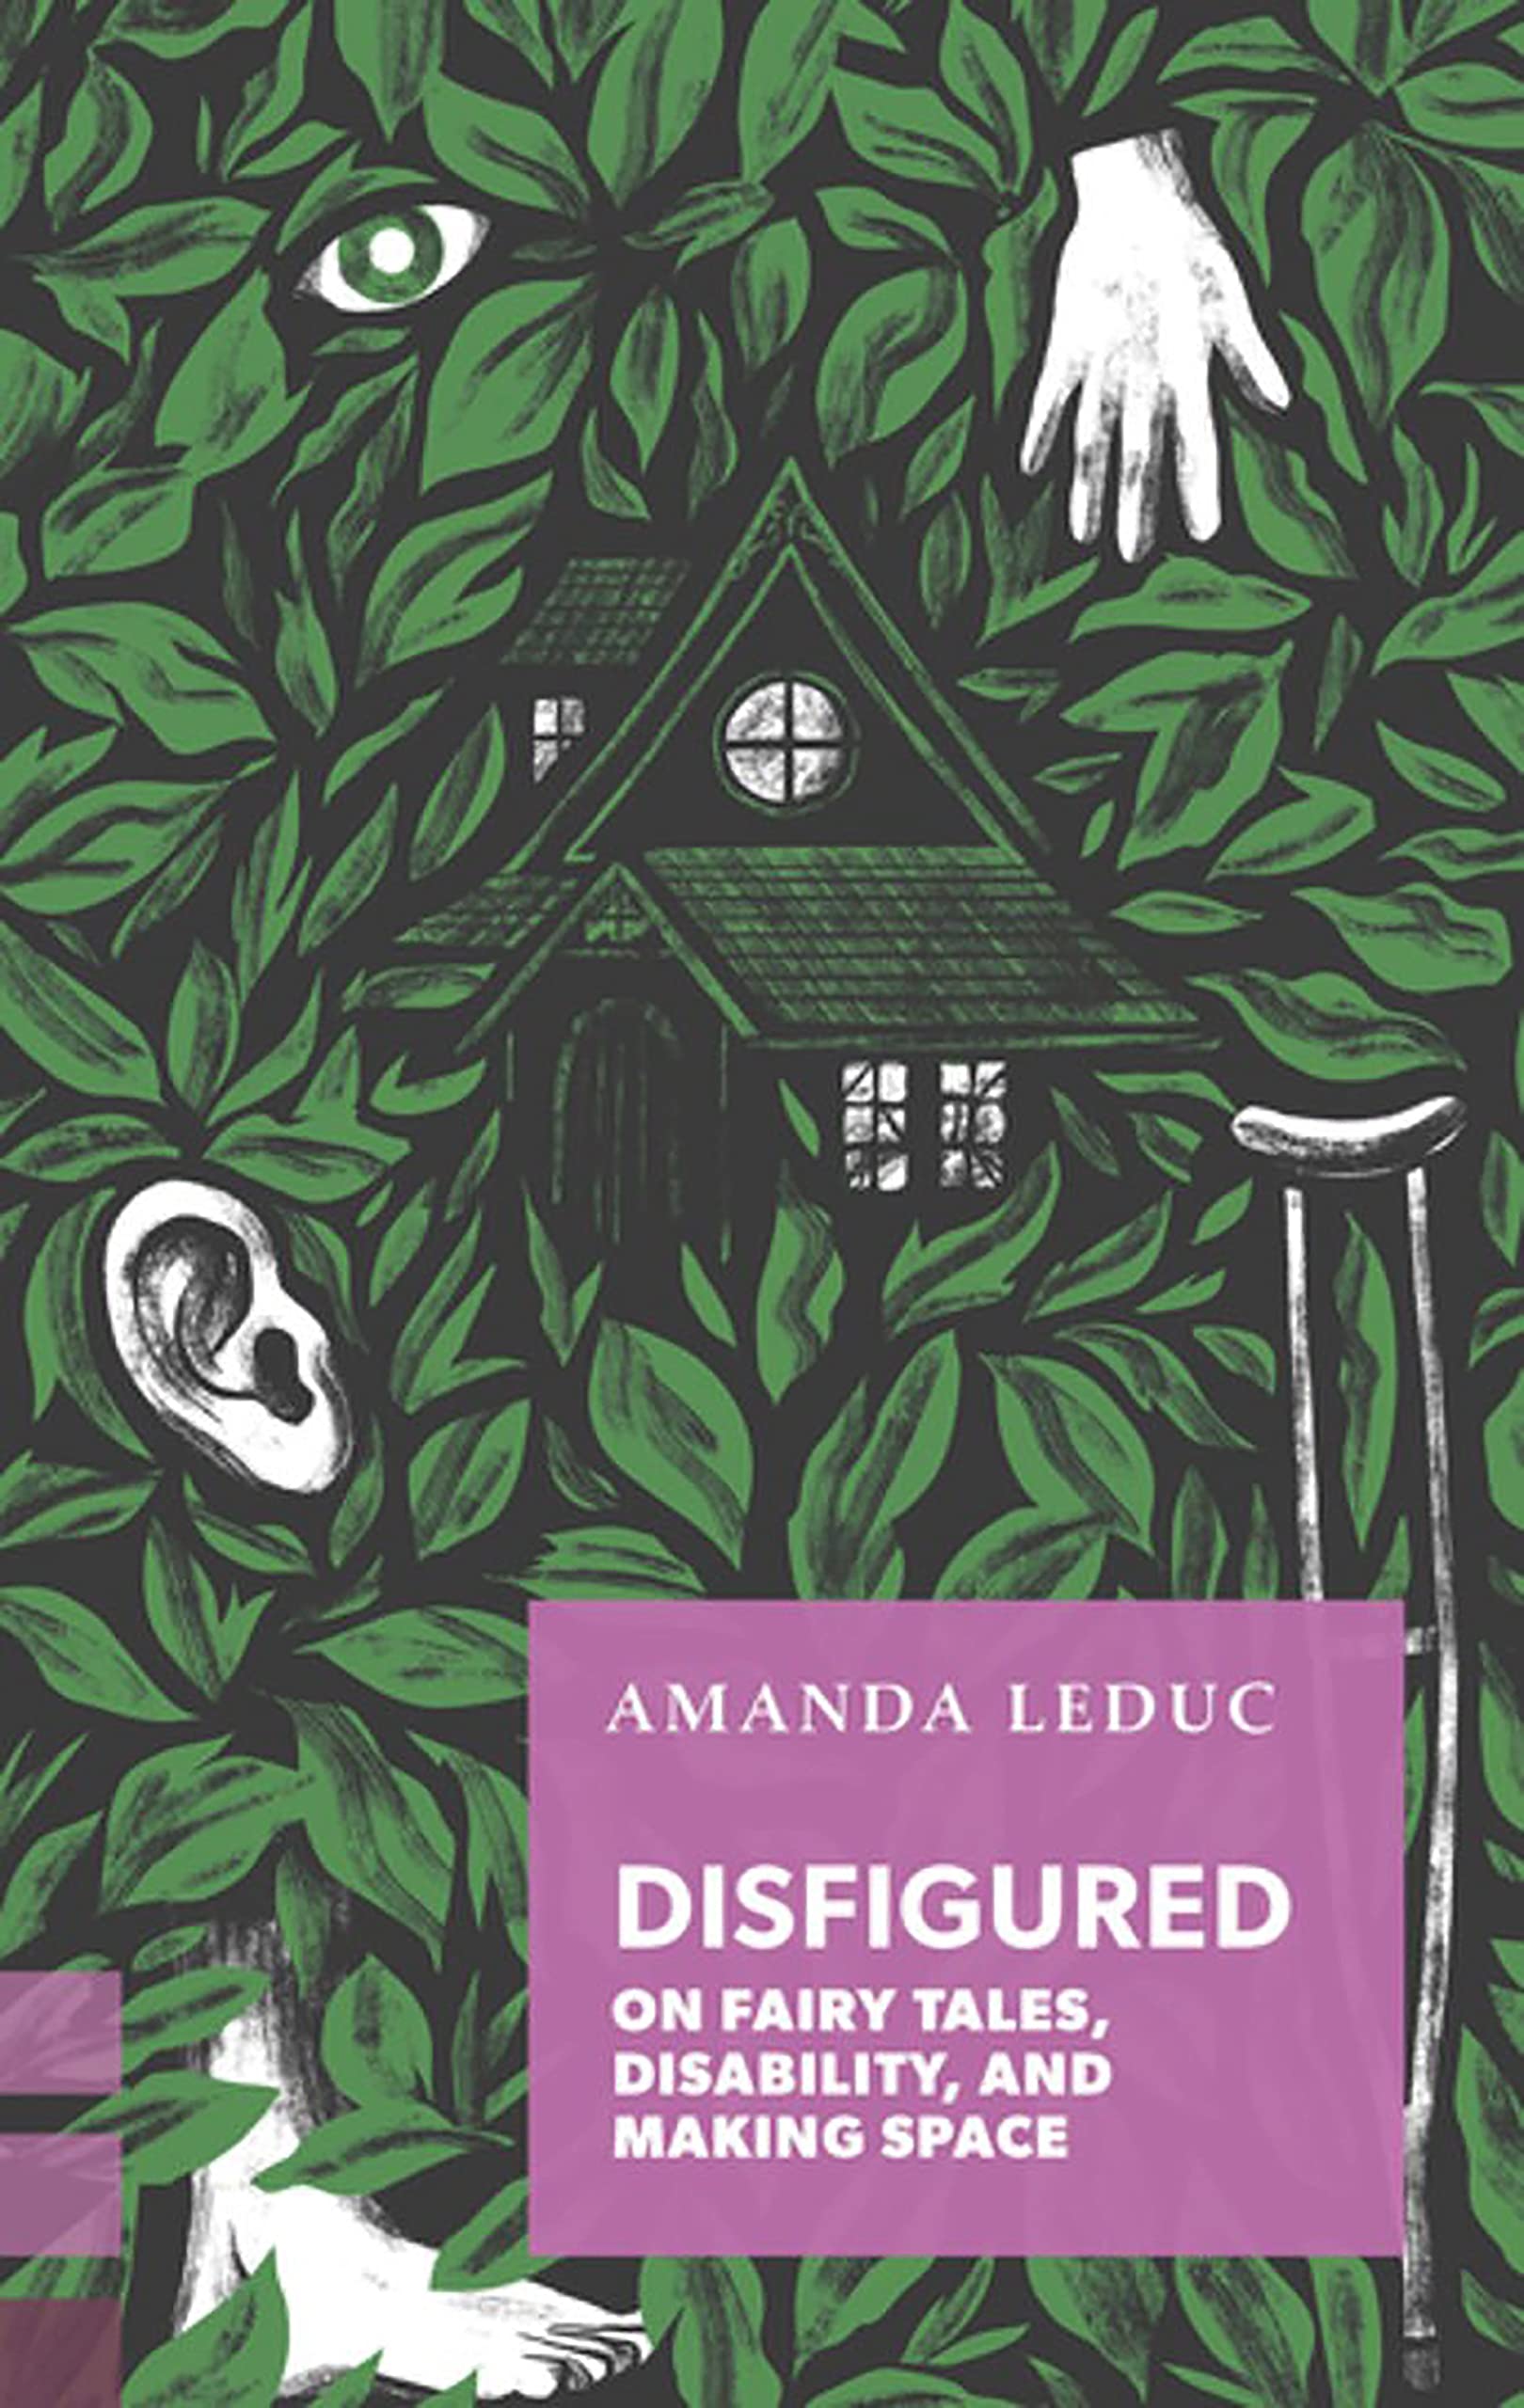 Book cover for Disfigured : on Fairy Tales, Disability and Making Space by Amanda Leduc featuring an illustration of foliage, a cottage-style house, a hand, an eye, an ear, a crutch and an foot.